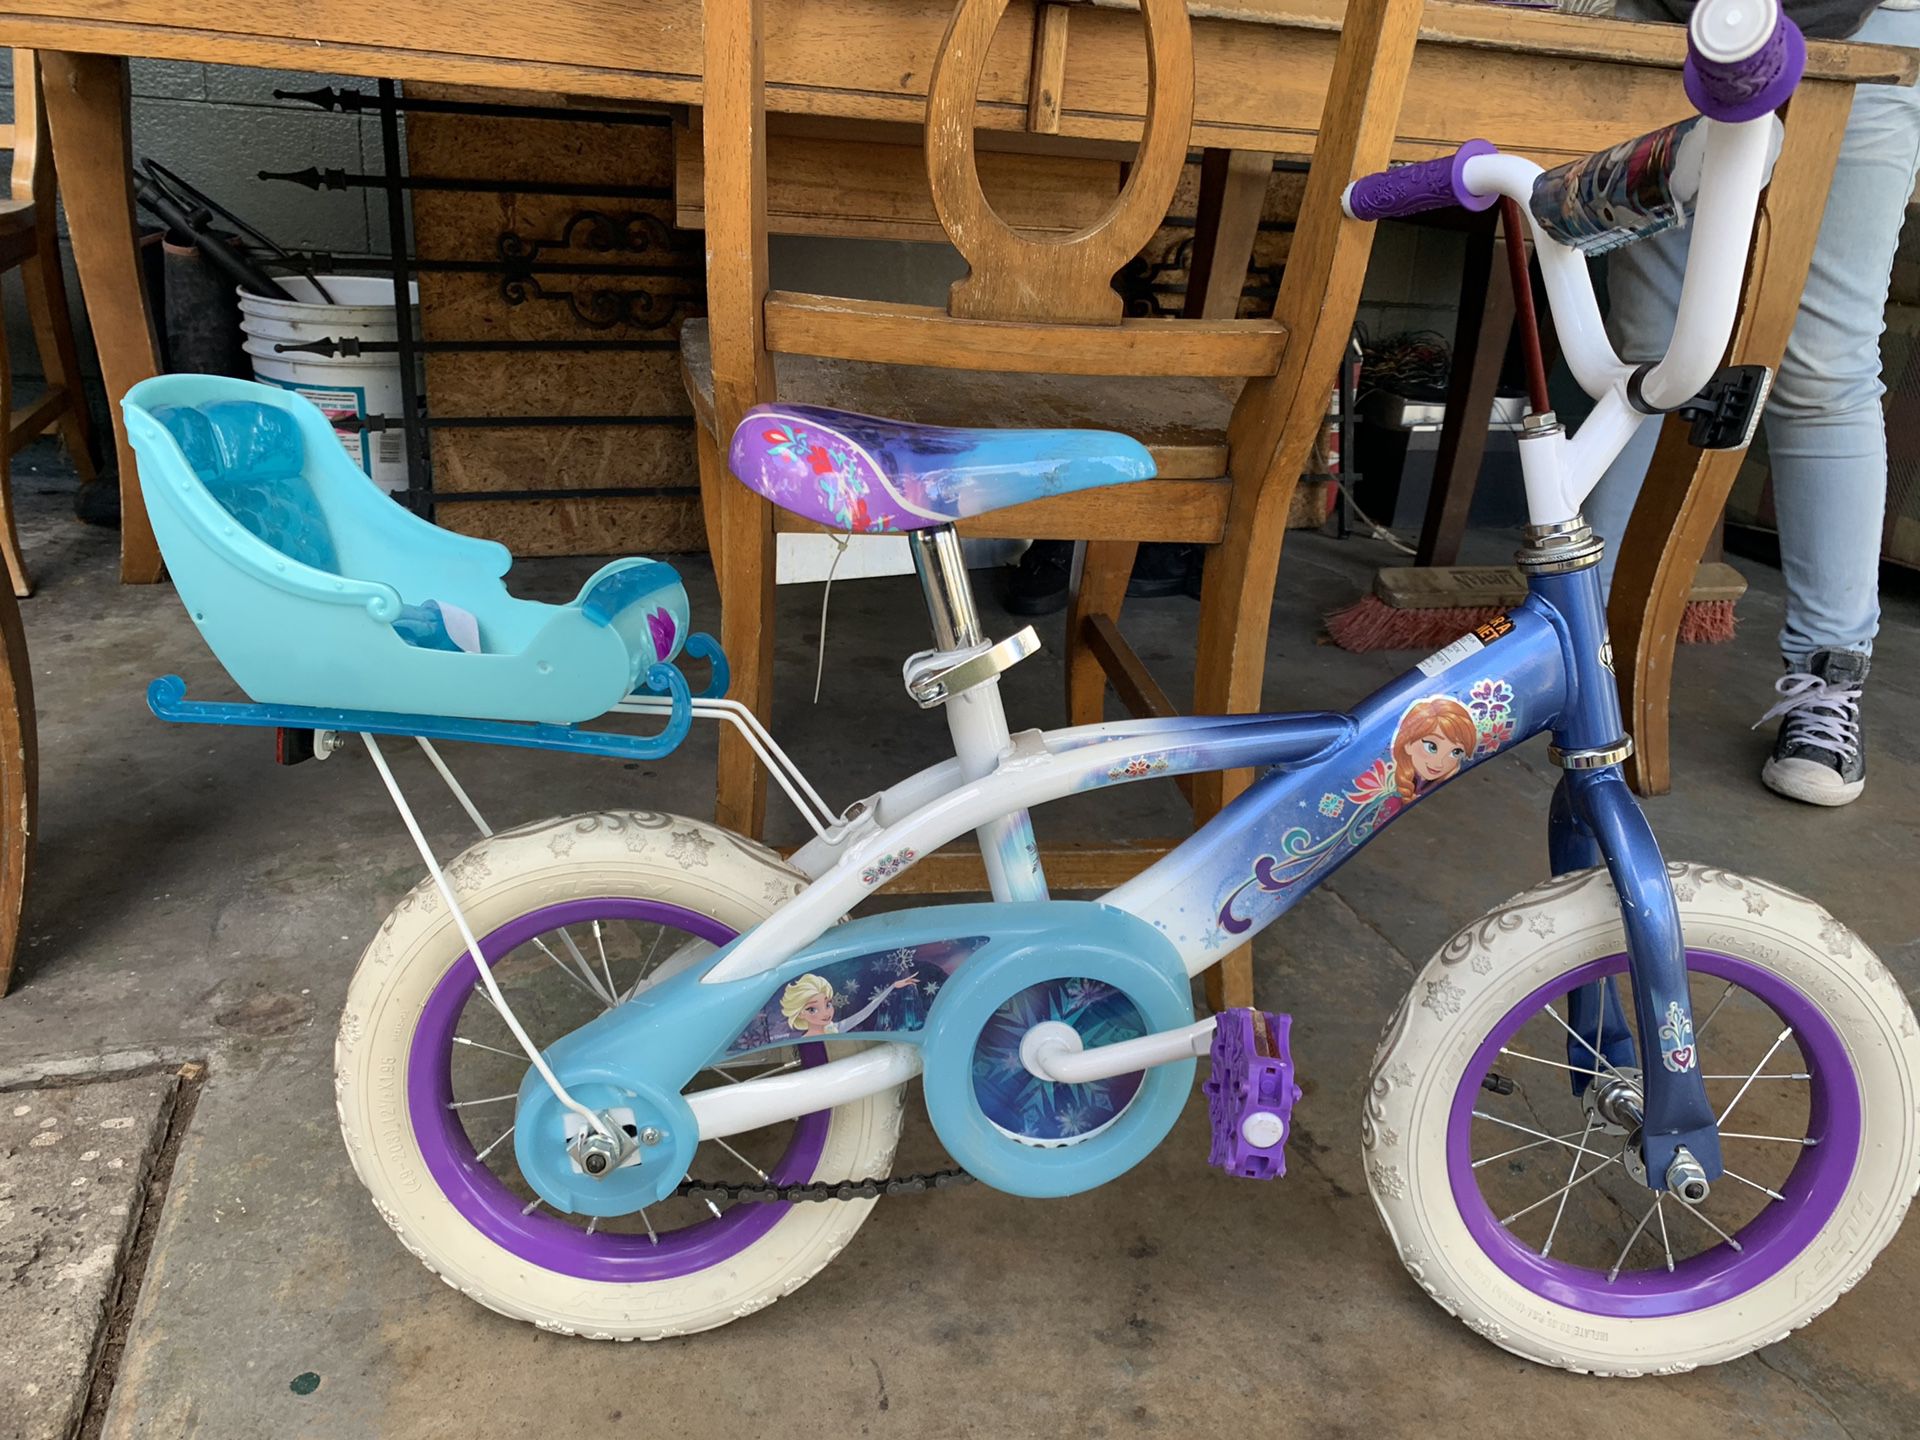 Frozen 12” bicycle without training wheels